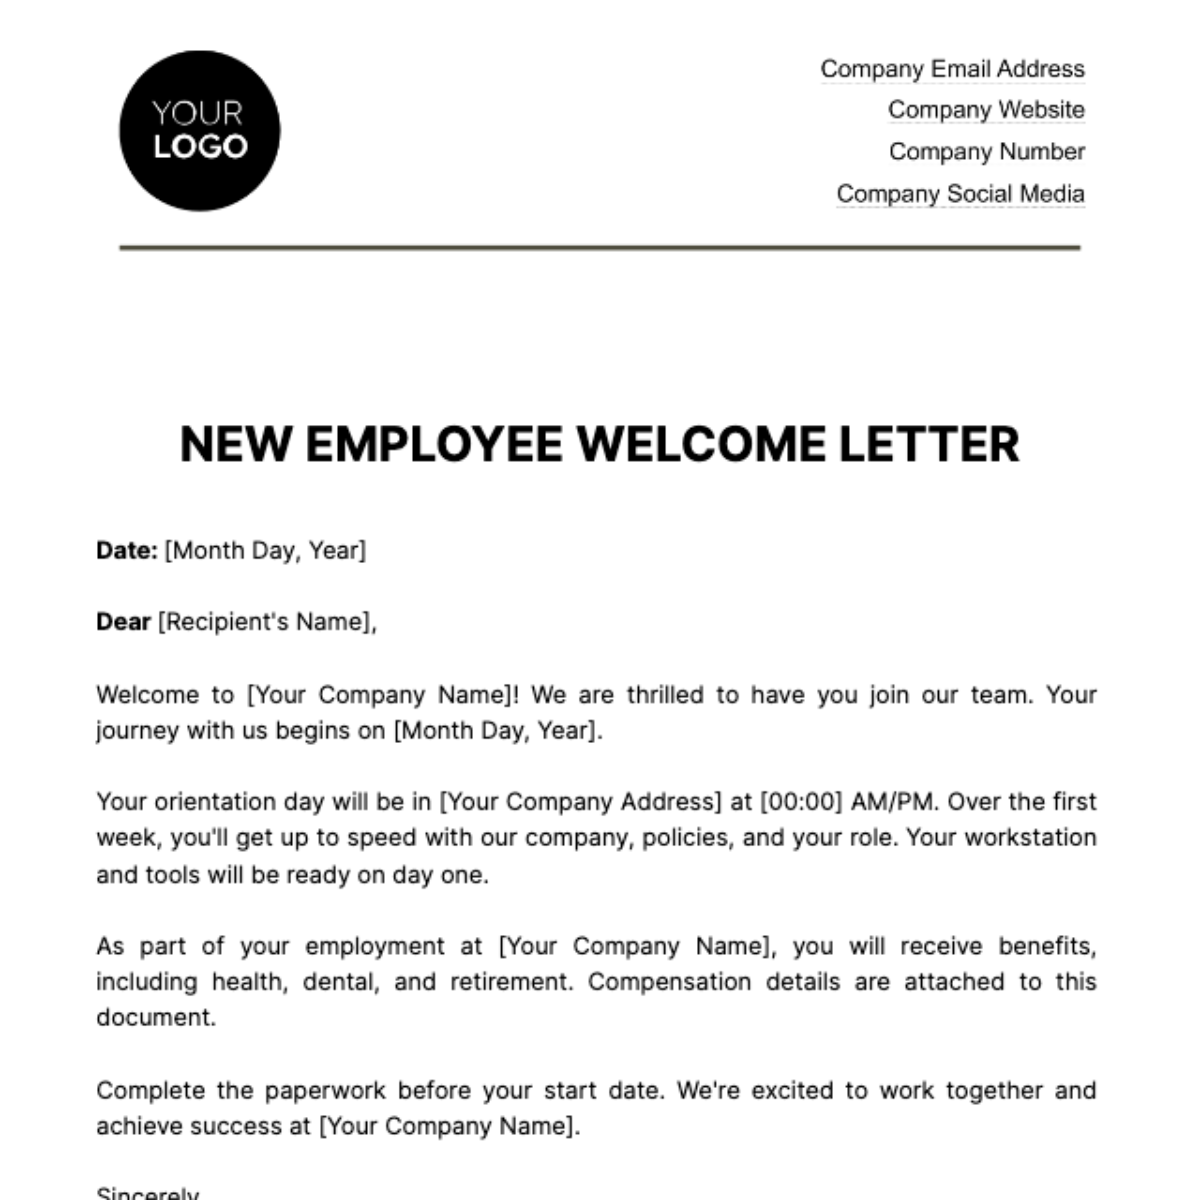 New Employee Welcome Letter HR Template